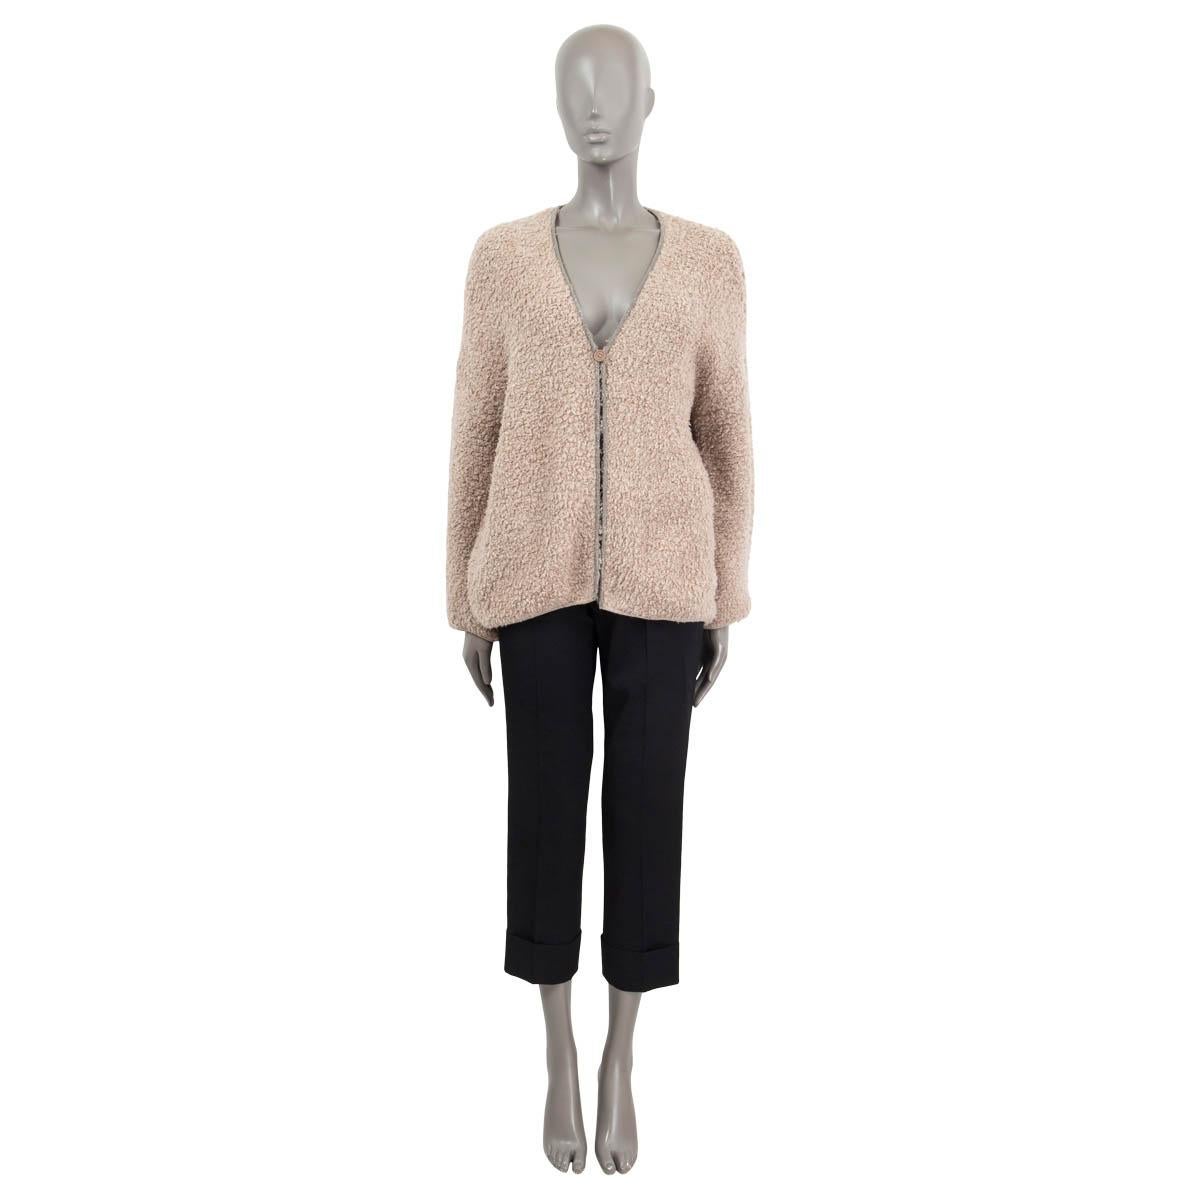 100% authentic Brunello Cucinelli teddy single button cardigan in beige cashmere (90%) and polyamide (10%). Features molini-chain trim in silver, and a v-neck. Unlined Has been worn and is in excellent condition. 

Measurements
Tag